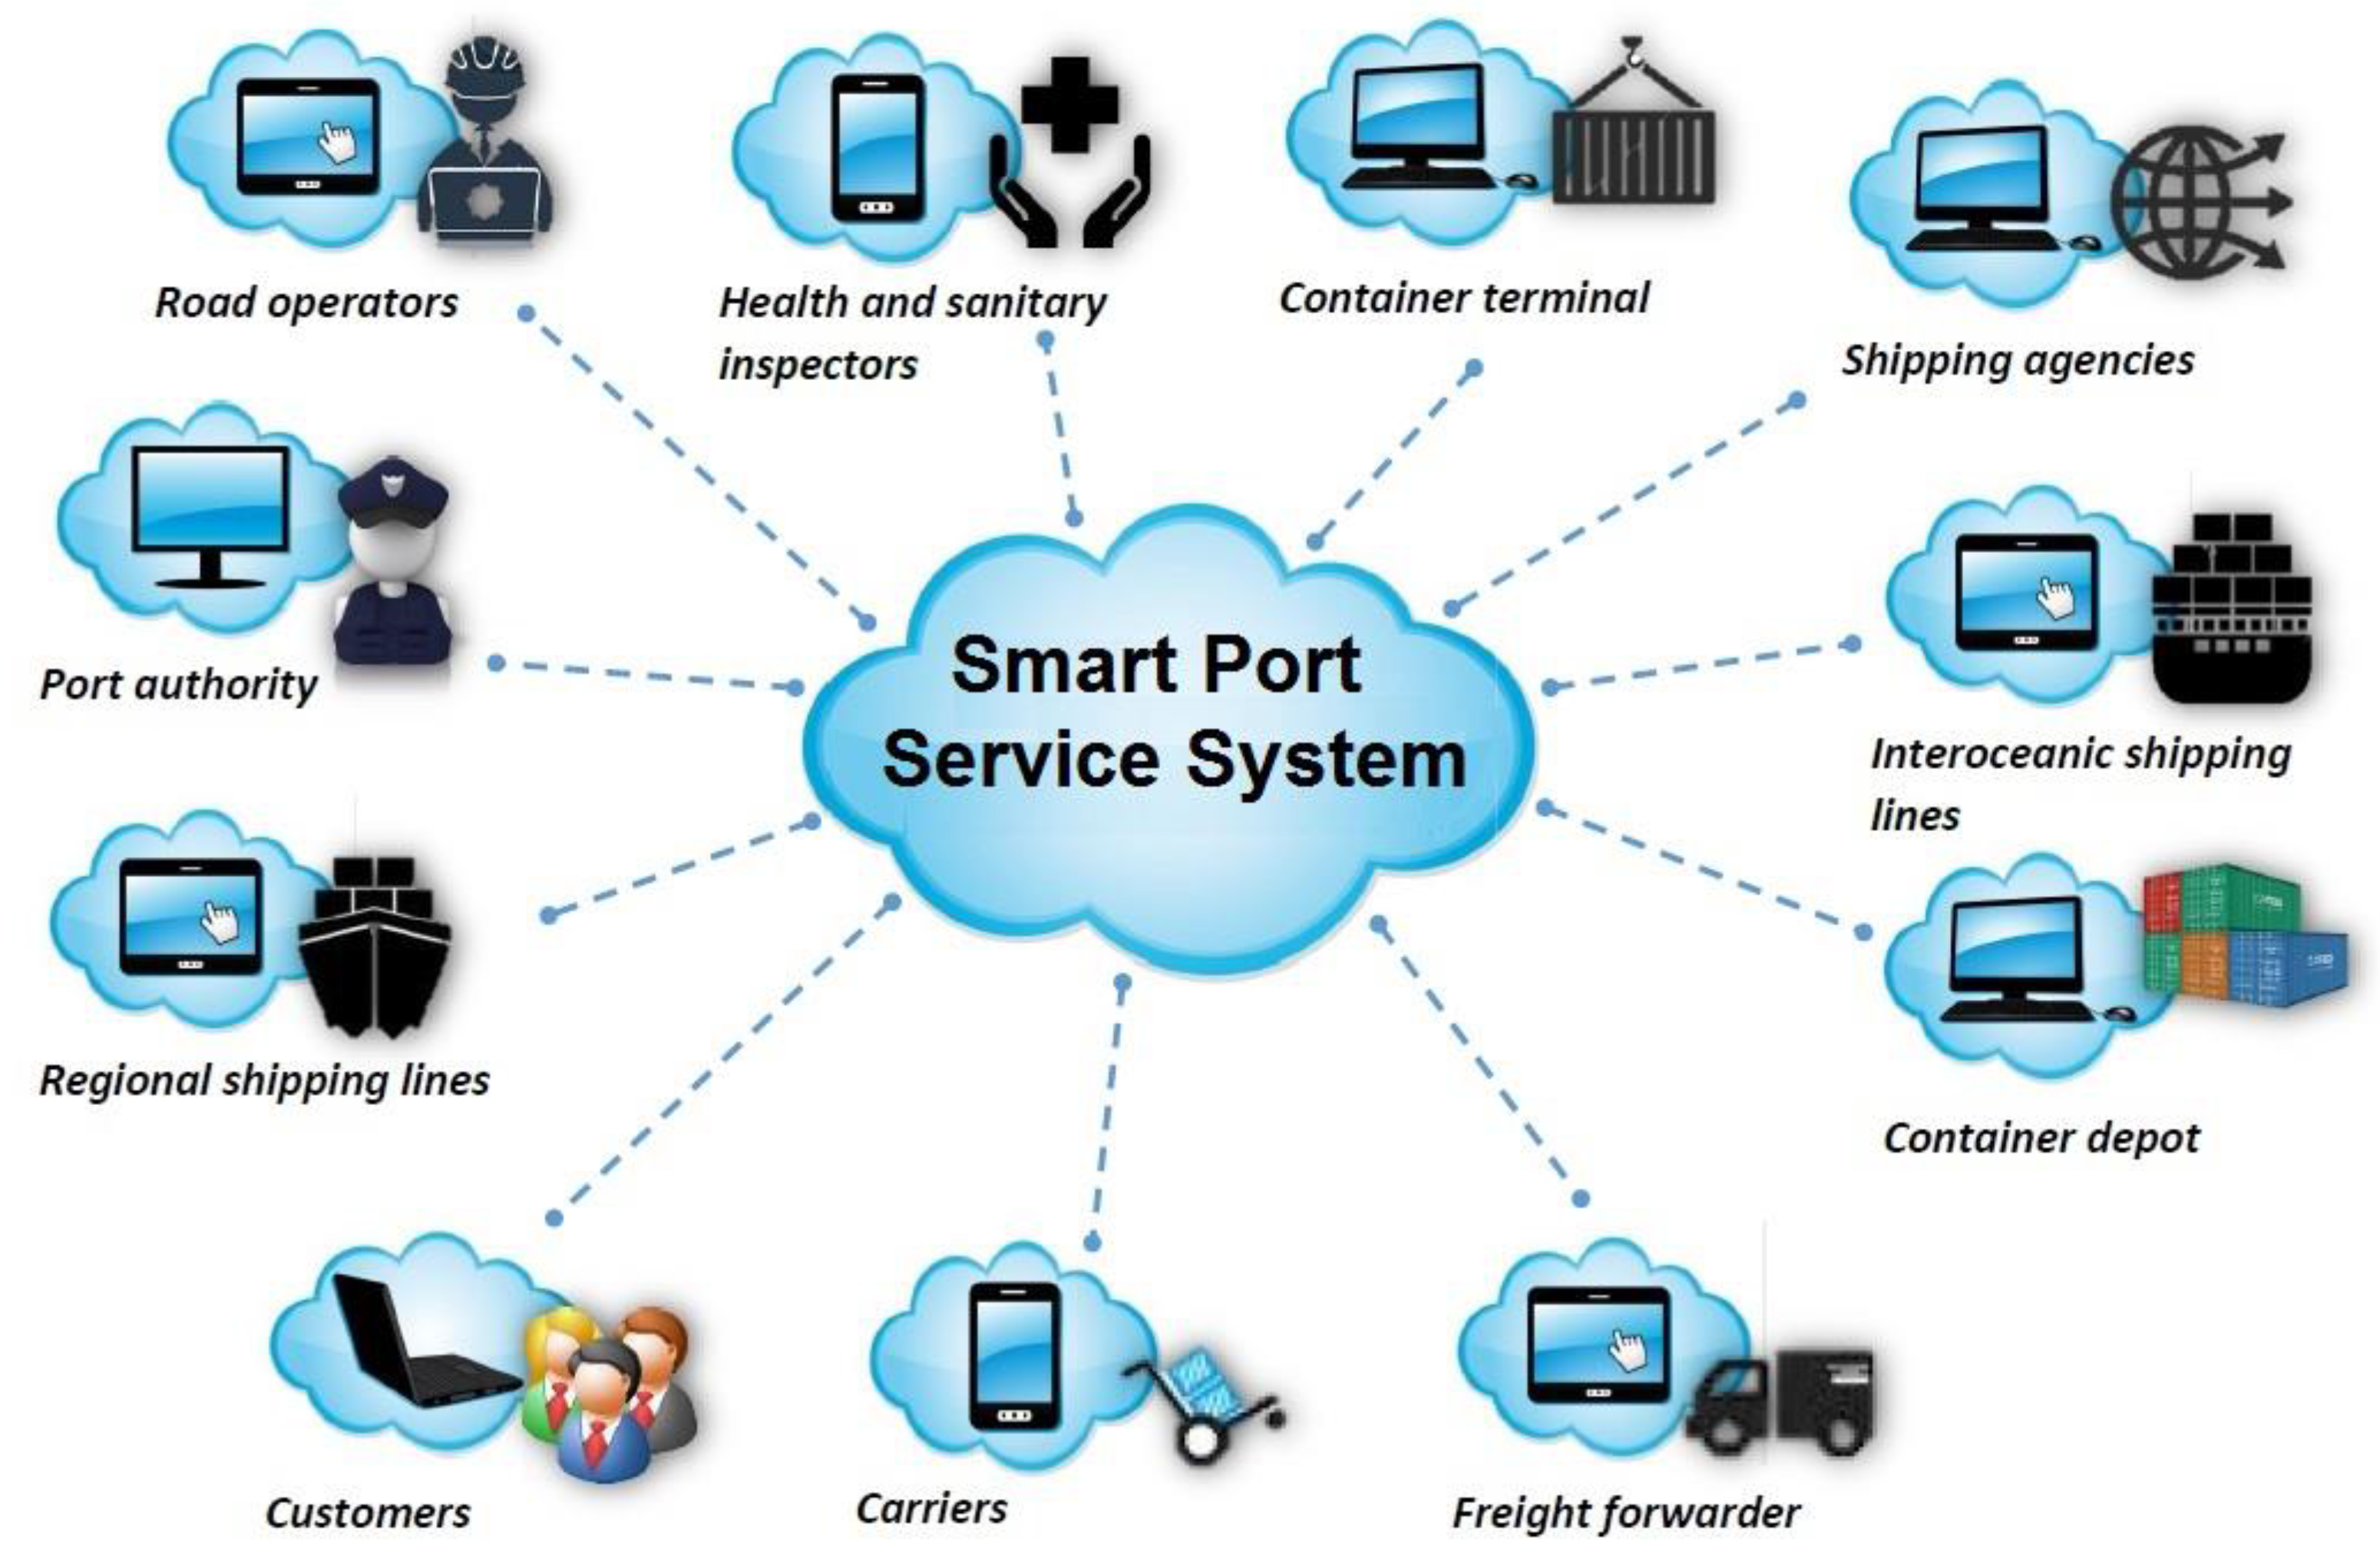 Port of Sète to become smart port of the future - SAFETY4SEA